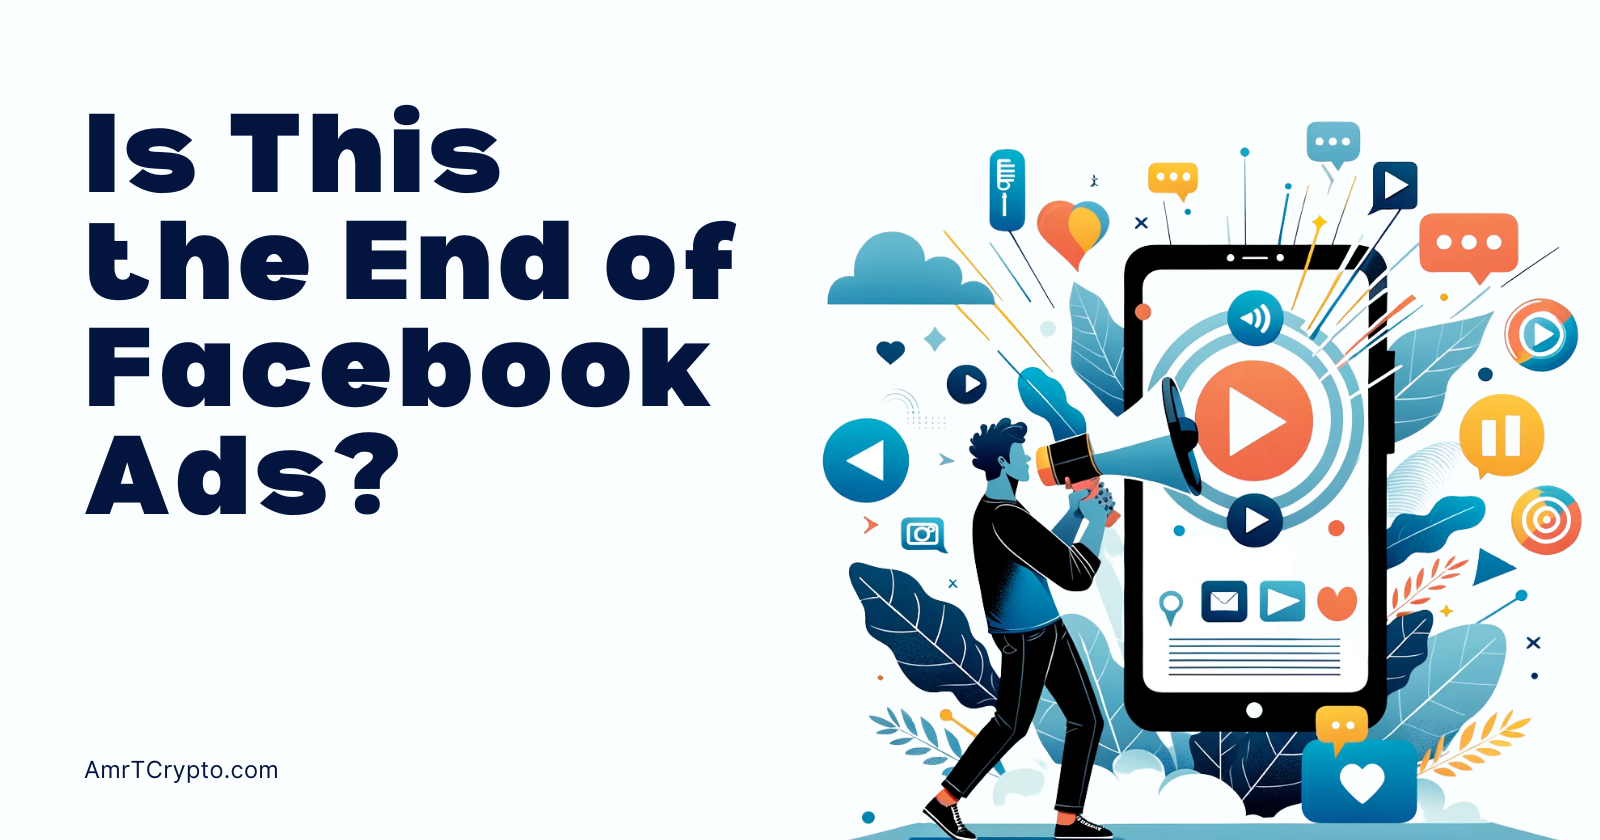 Is This the End of Facebook Ads?